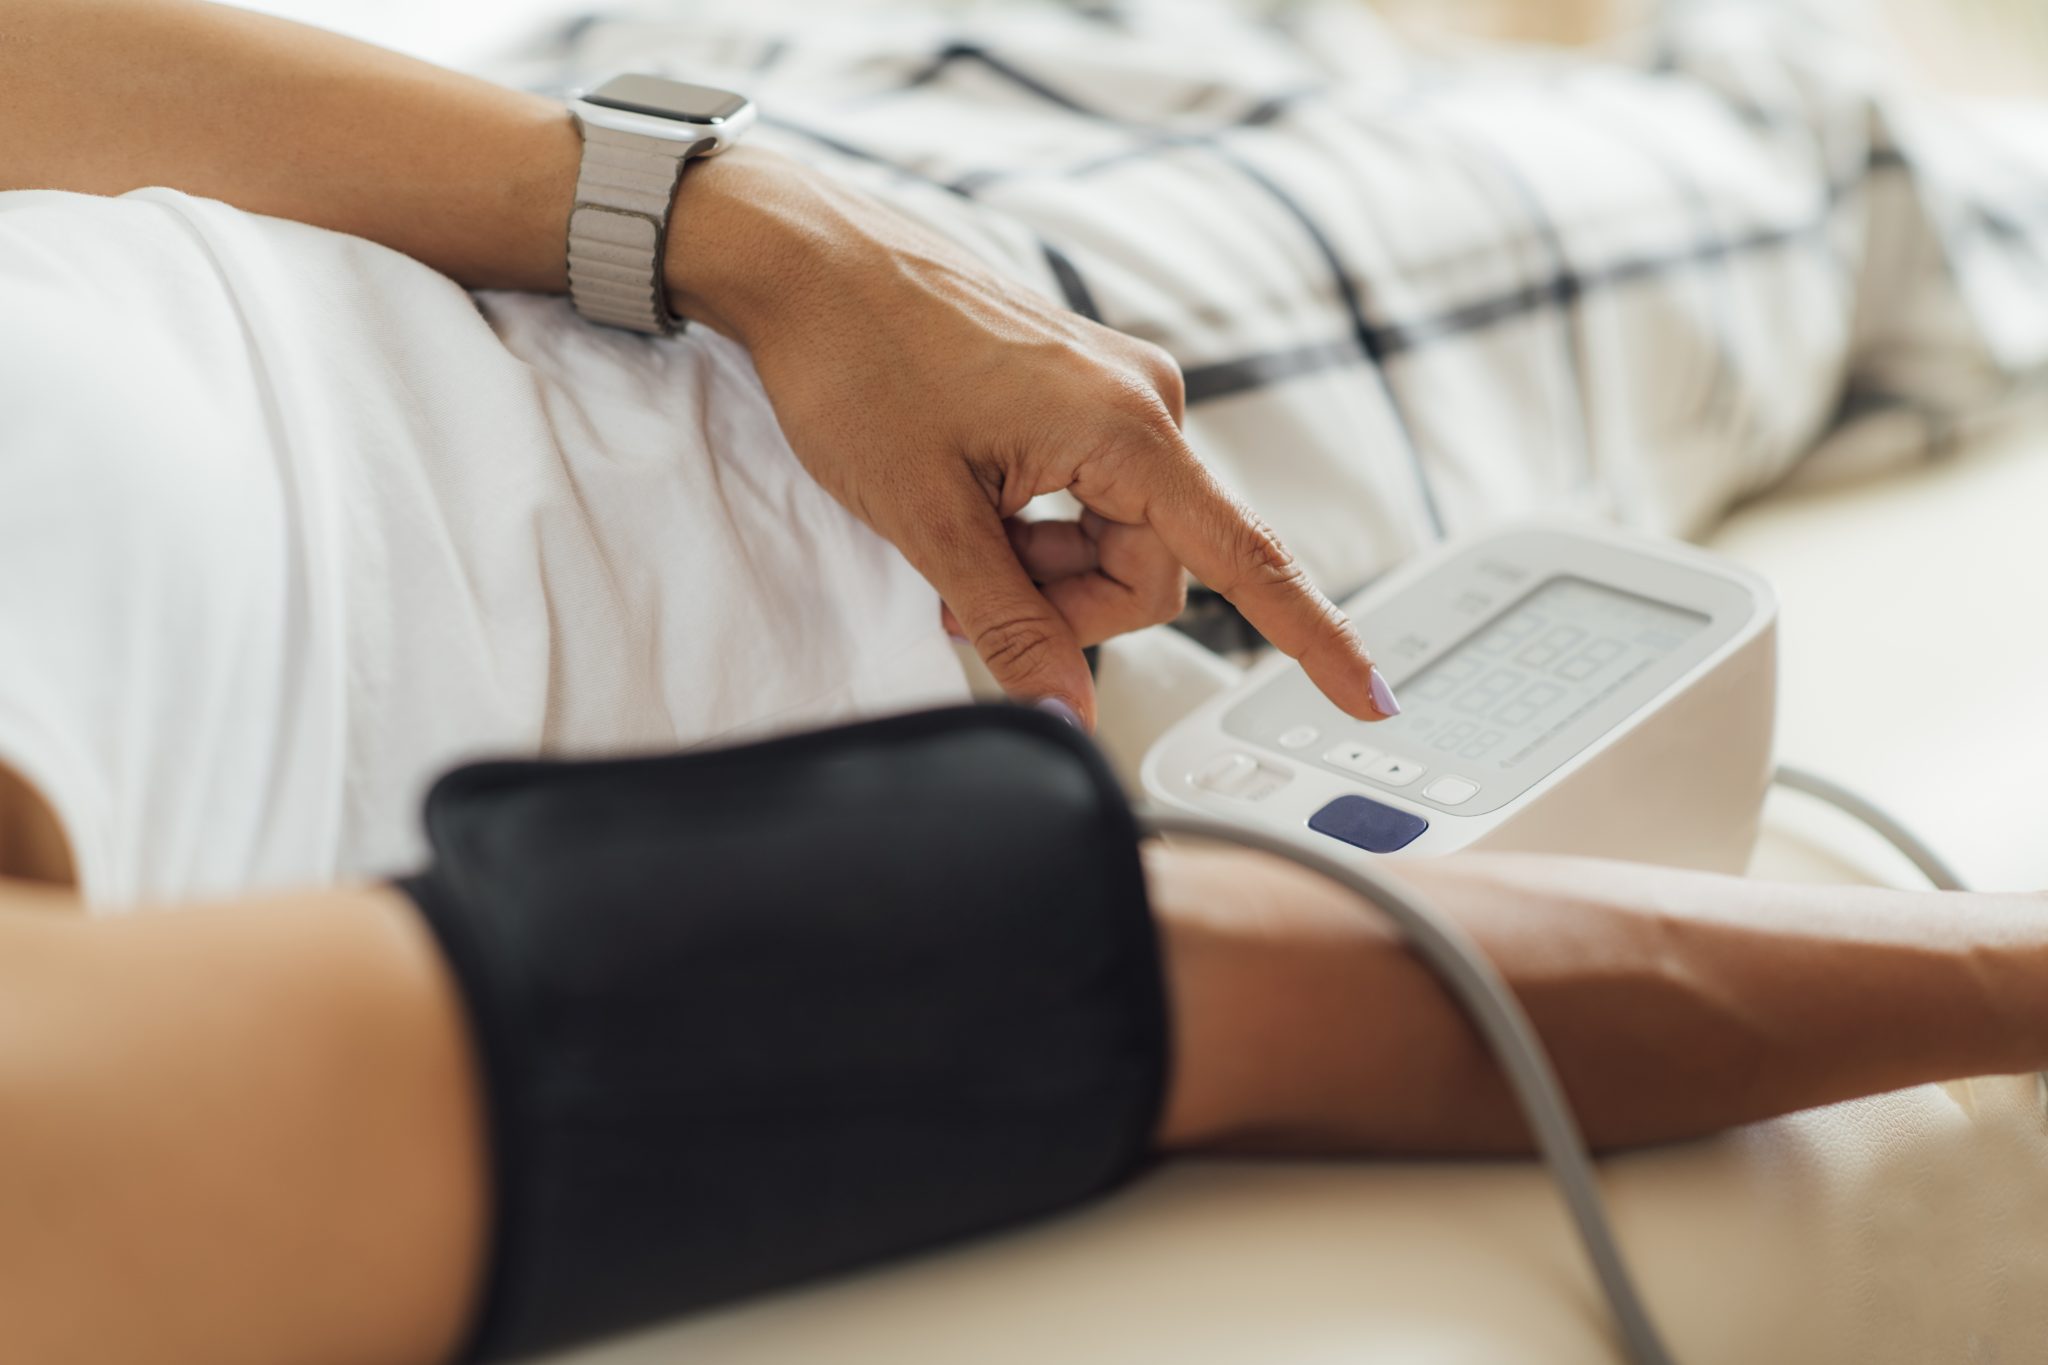 Does Medicare Cover Home Blood Pressure Monitors? Here